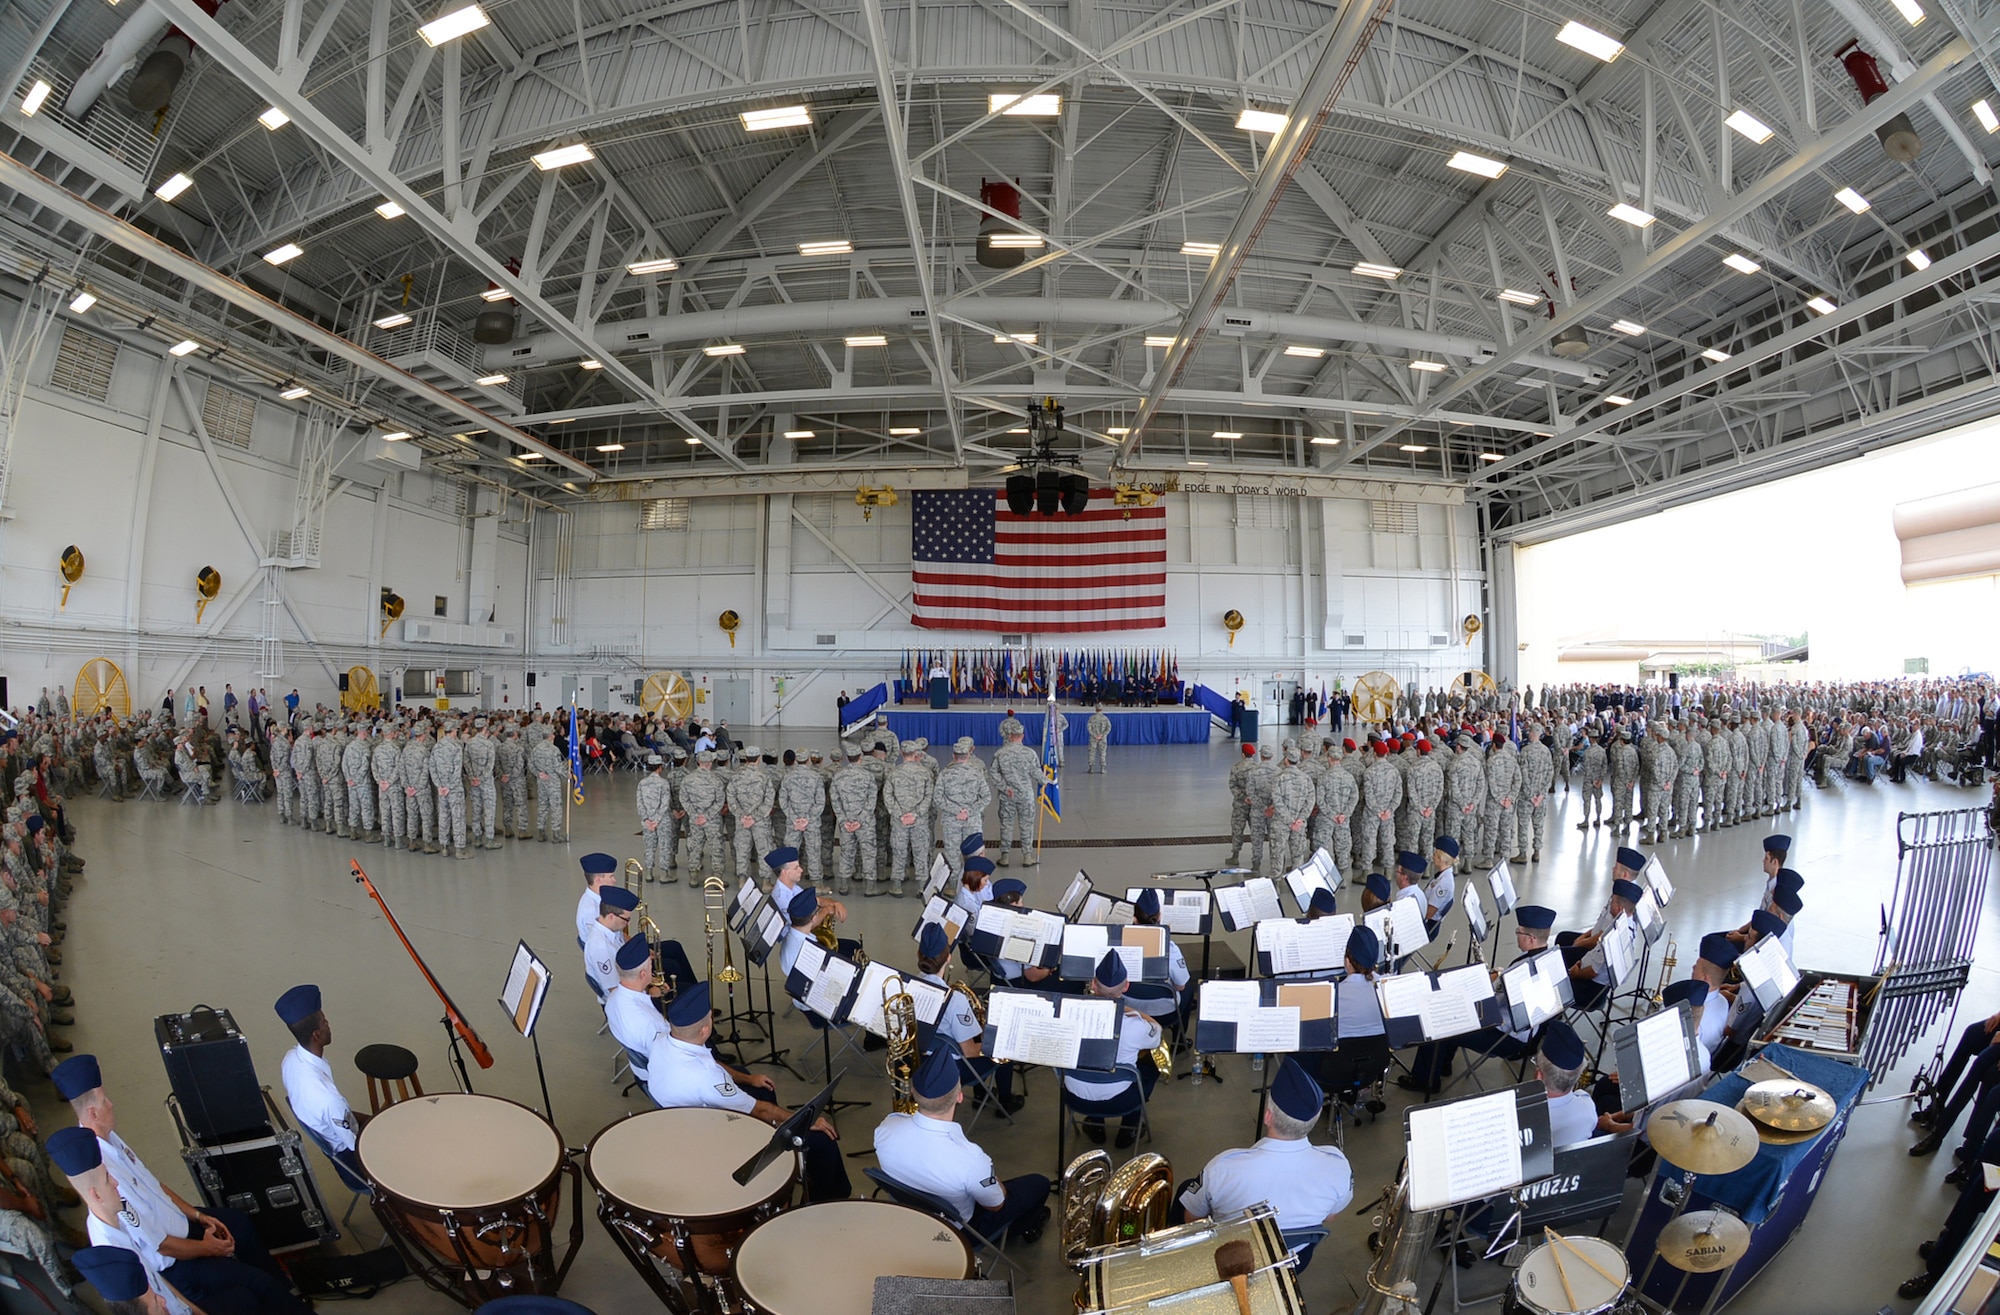 Air Commandos stand in formation during the Air Force Special Operations Command change of command ceremony held at Hurlburt Field, Fla., July 3, 2014. The command's mission is to present combat-ready Air Force Special Operations Forces to conduct and support global special operations missions. (U.S. Air Force photo by Master Sgt. Steven Pearsall)